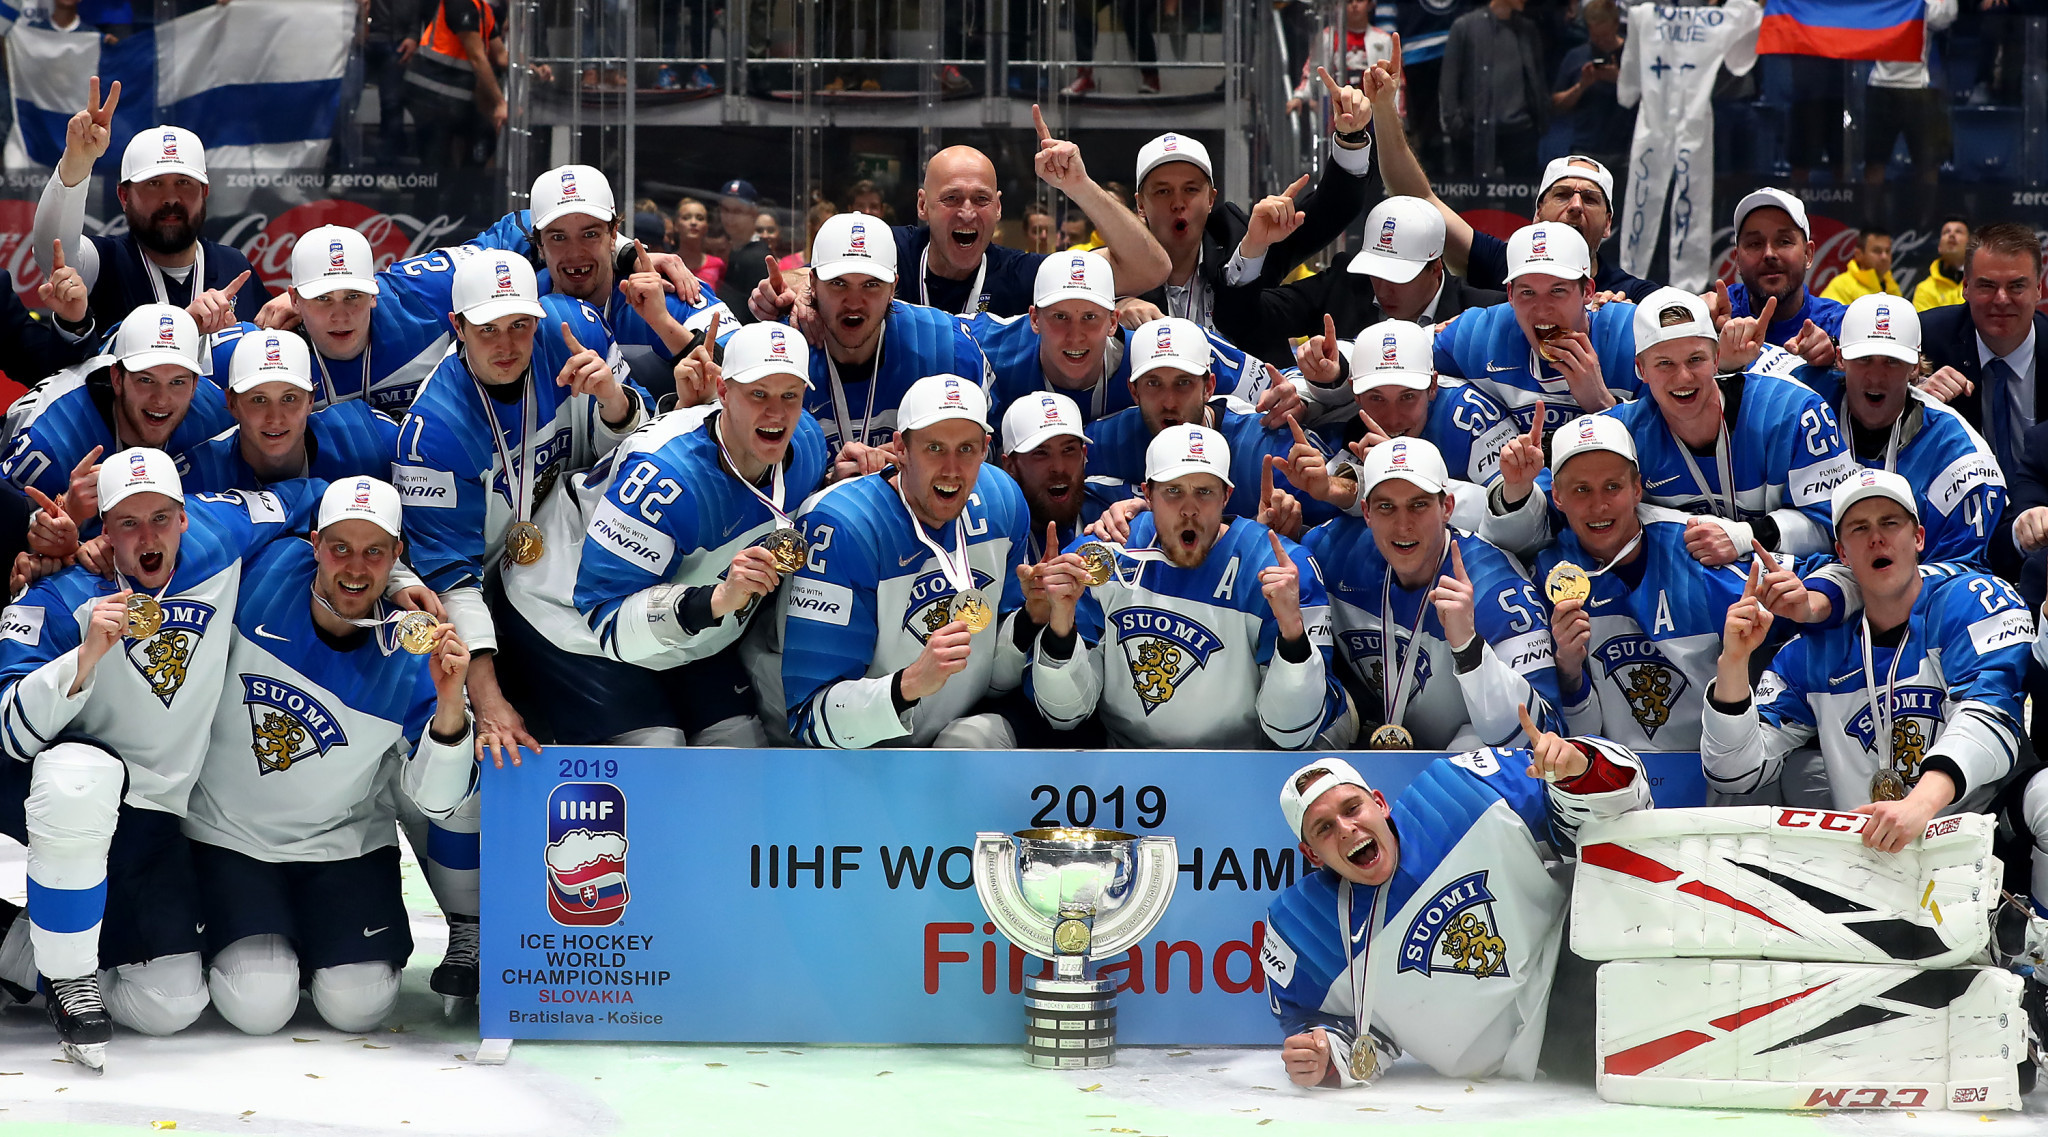 Finland will defend their title in Switzerland next year ©Getty Images